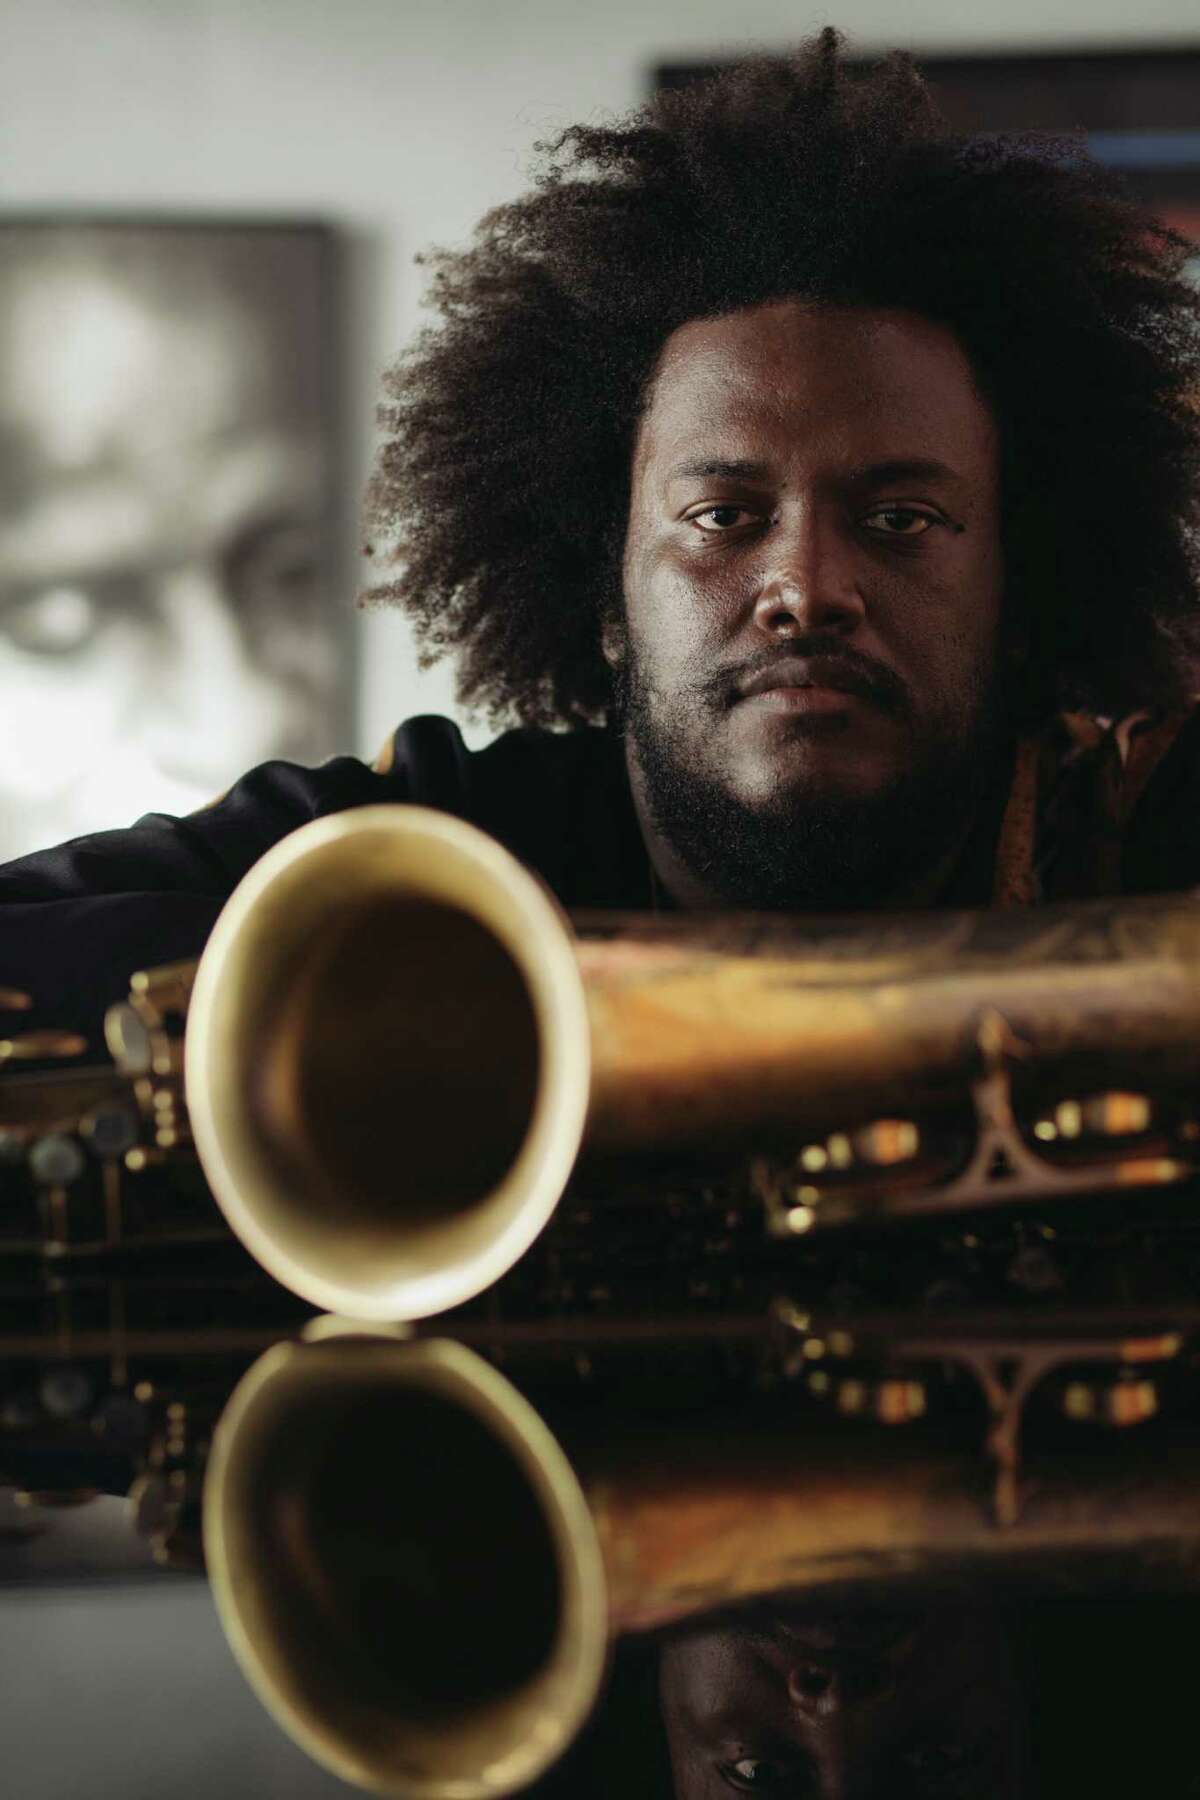 Kamasi Washington has earned the support of fans and critics for "The Epic," his three-disc, nearly three-hour musical journey through jazz that was released earlier this year. He will be at the Fairfield Theatre Company on Friday, Aug. 21, to share the trip with the audience.